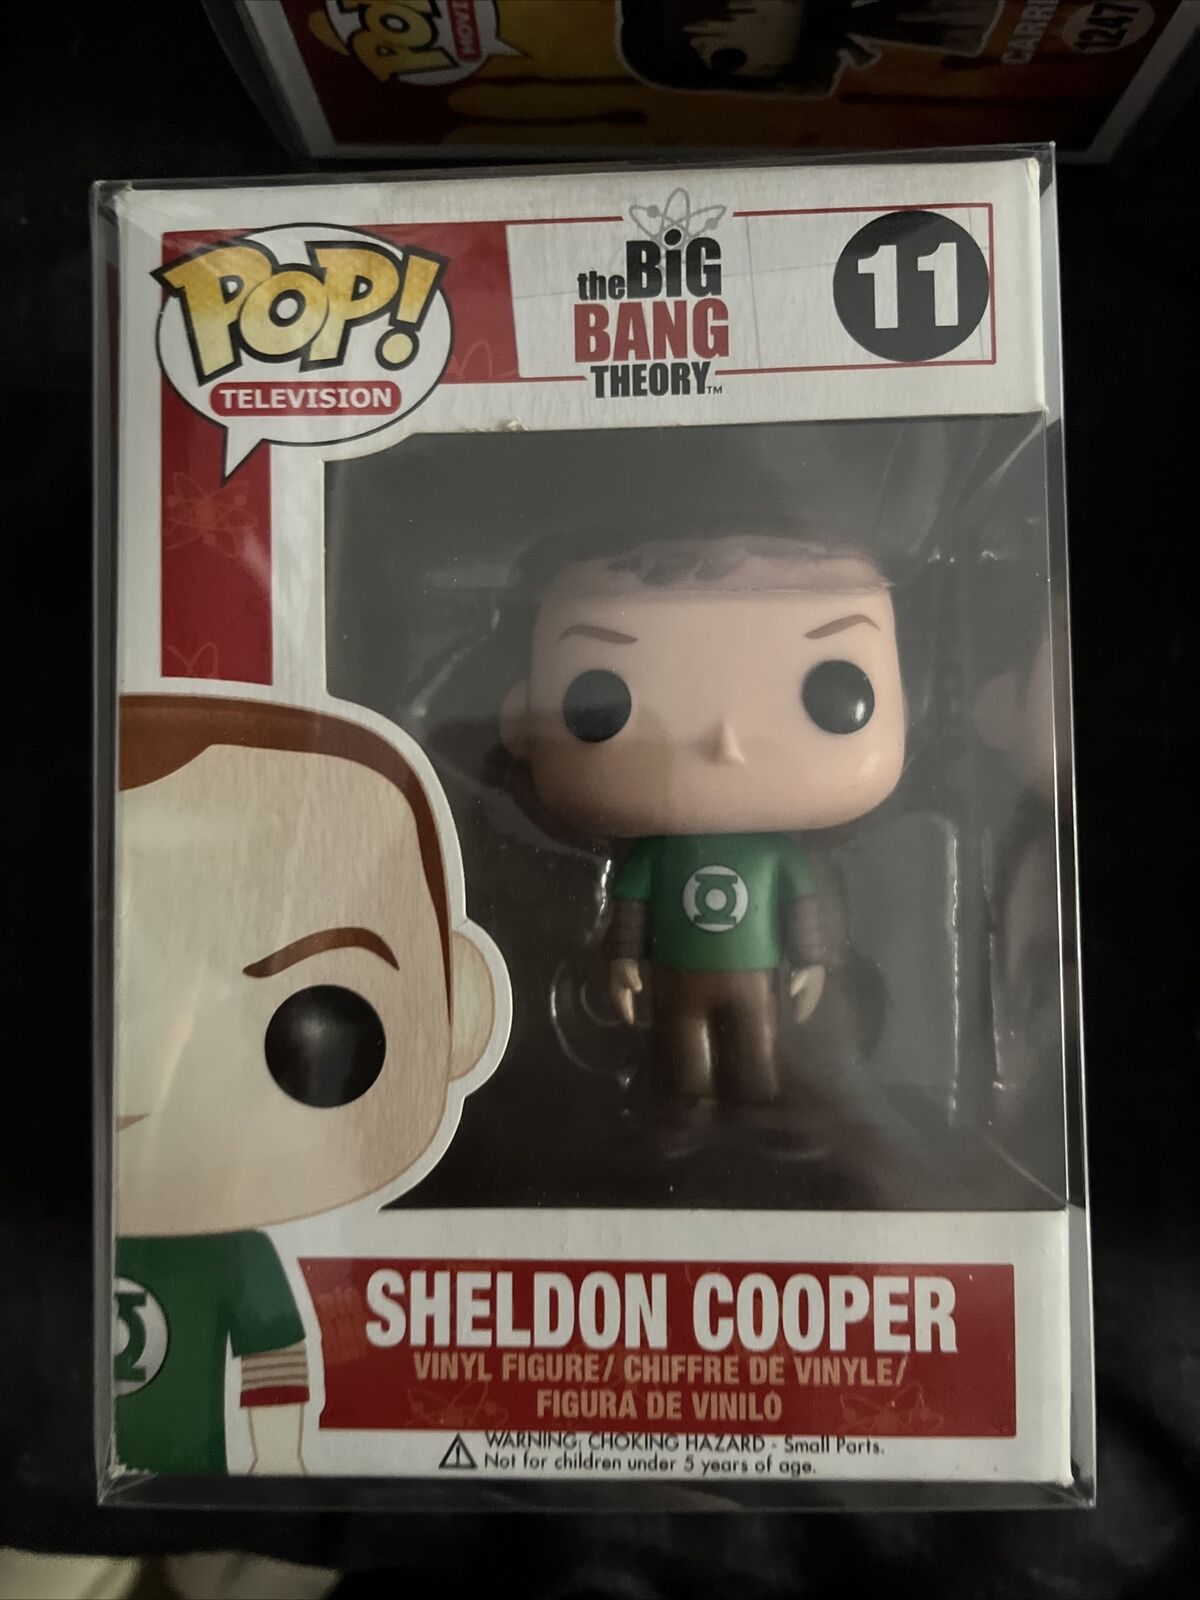 The Big Bang Theory: Sheldon Cooper #11 Funko Pop With Protect Case